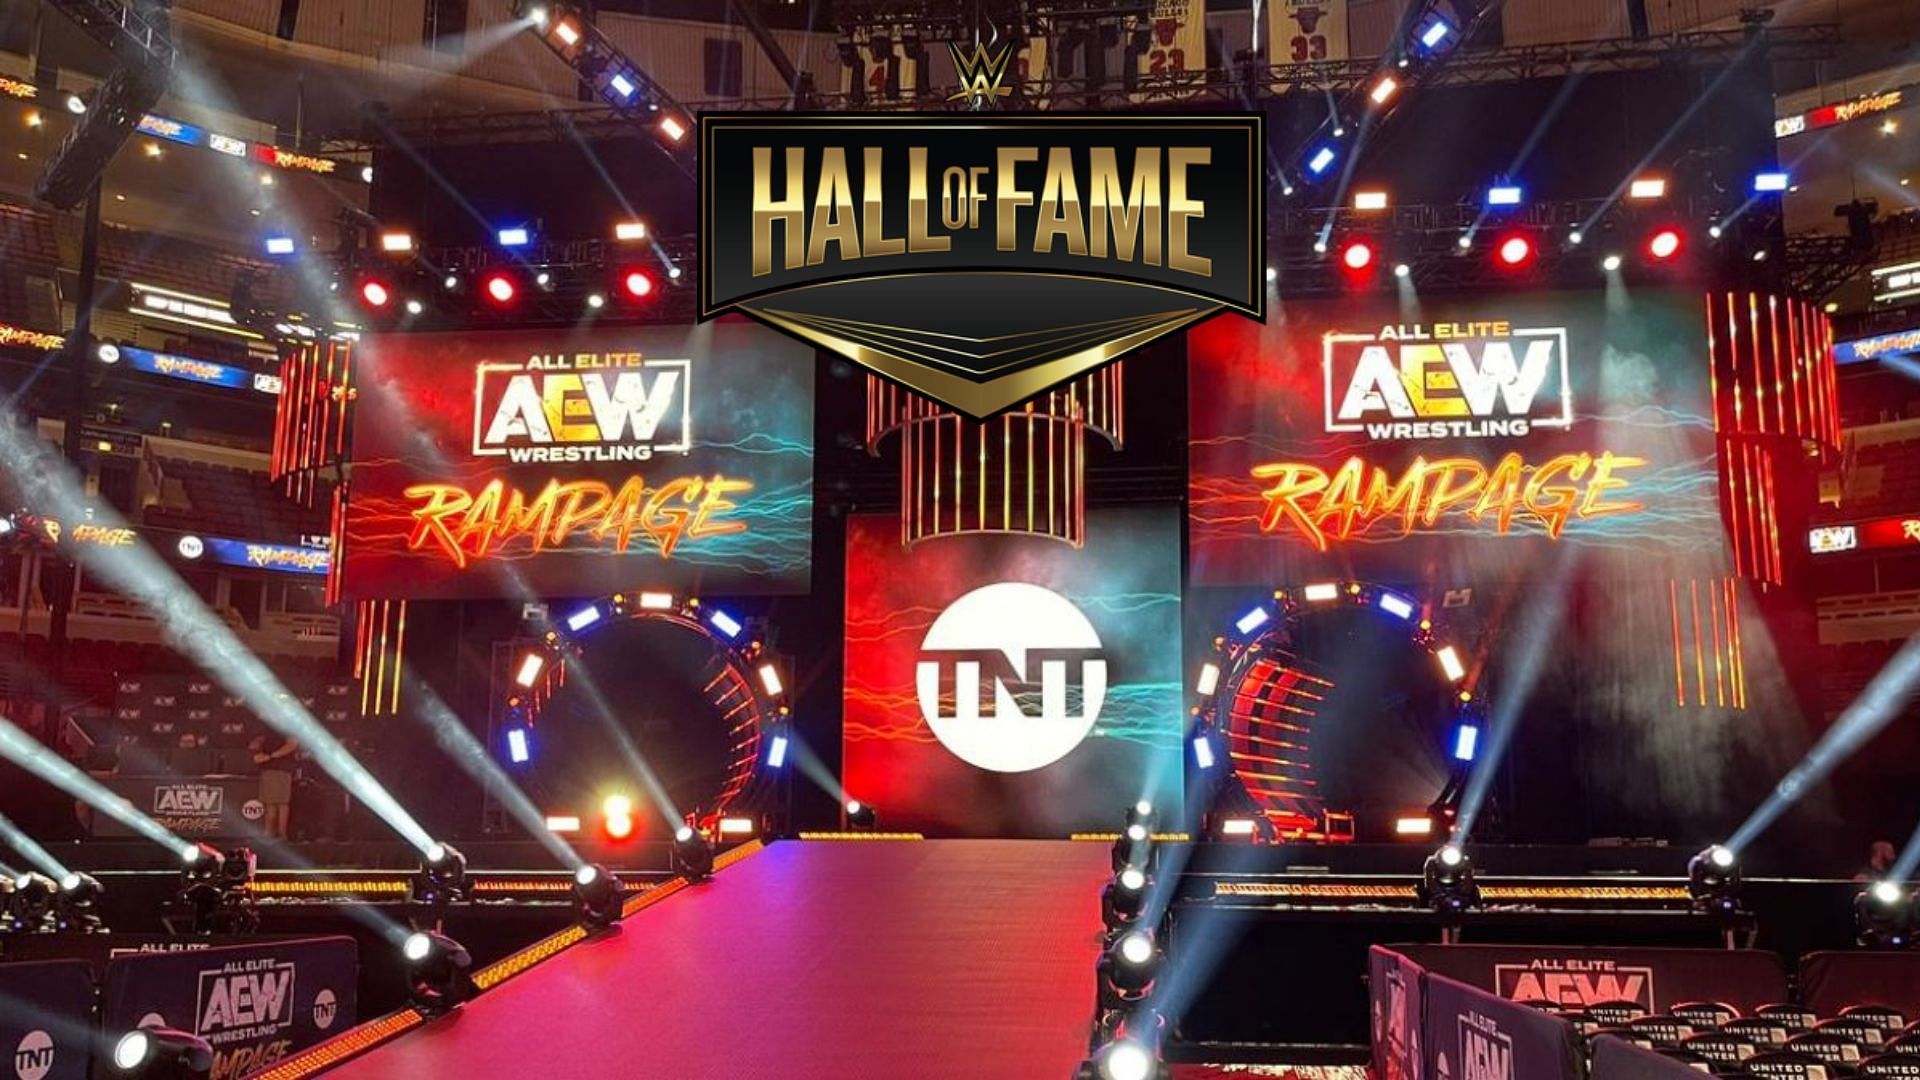 Which WWE Hall of Famer made his return to AEW this week?